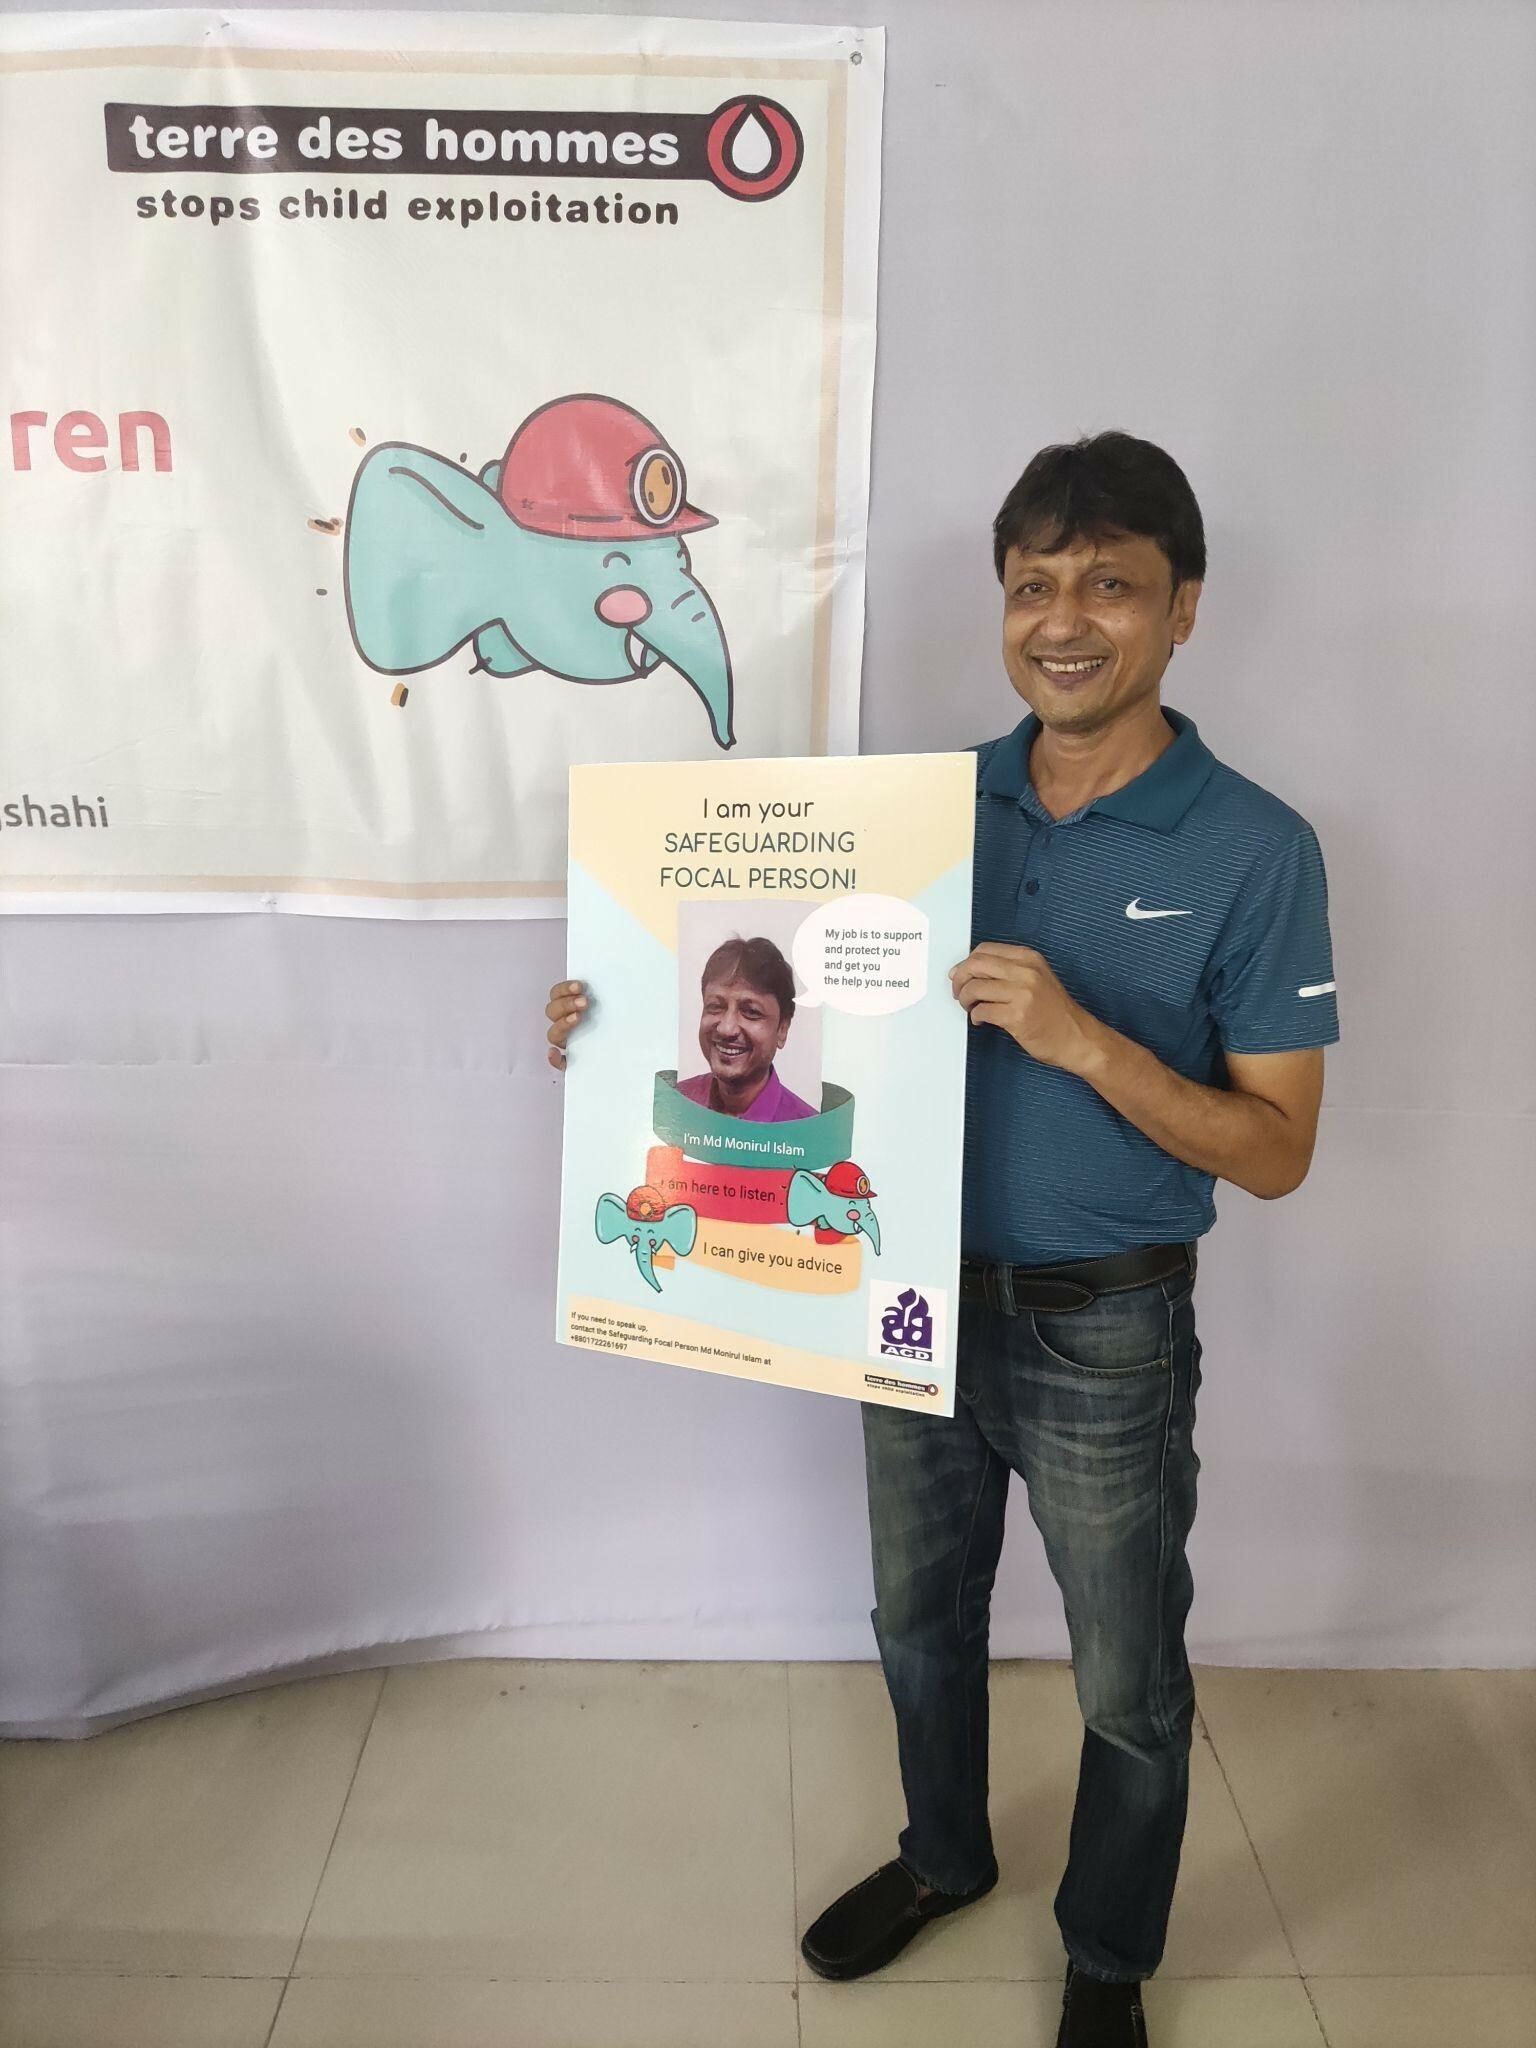 Figure 3. A social worker from Association for Community Development in Bangladesh, holding a poster announcing him as someone who is there to listen to children as the safeguarding focal point (picture taken and shared with consent).